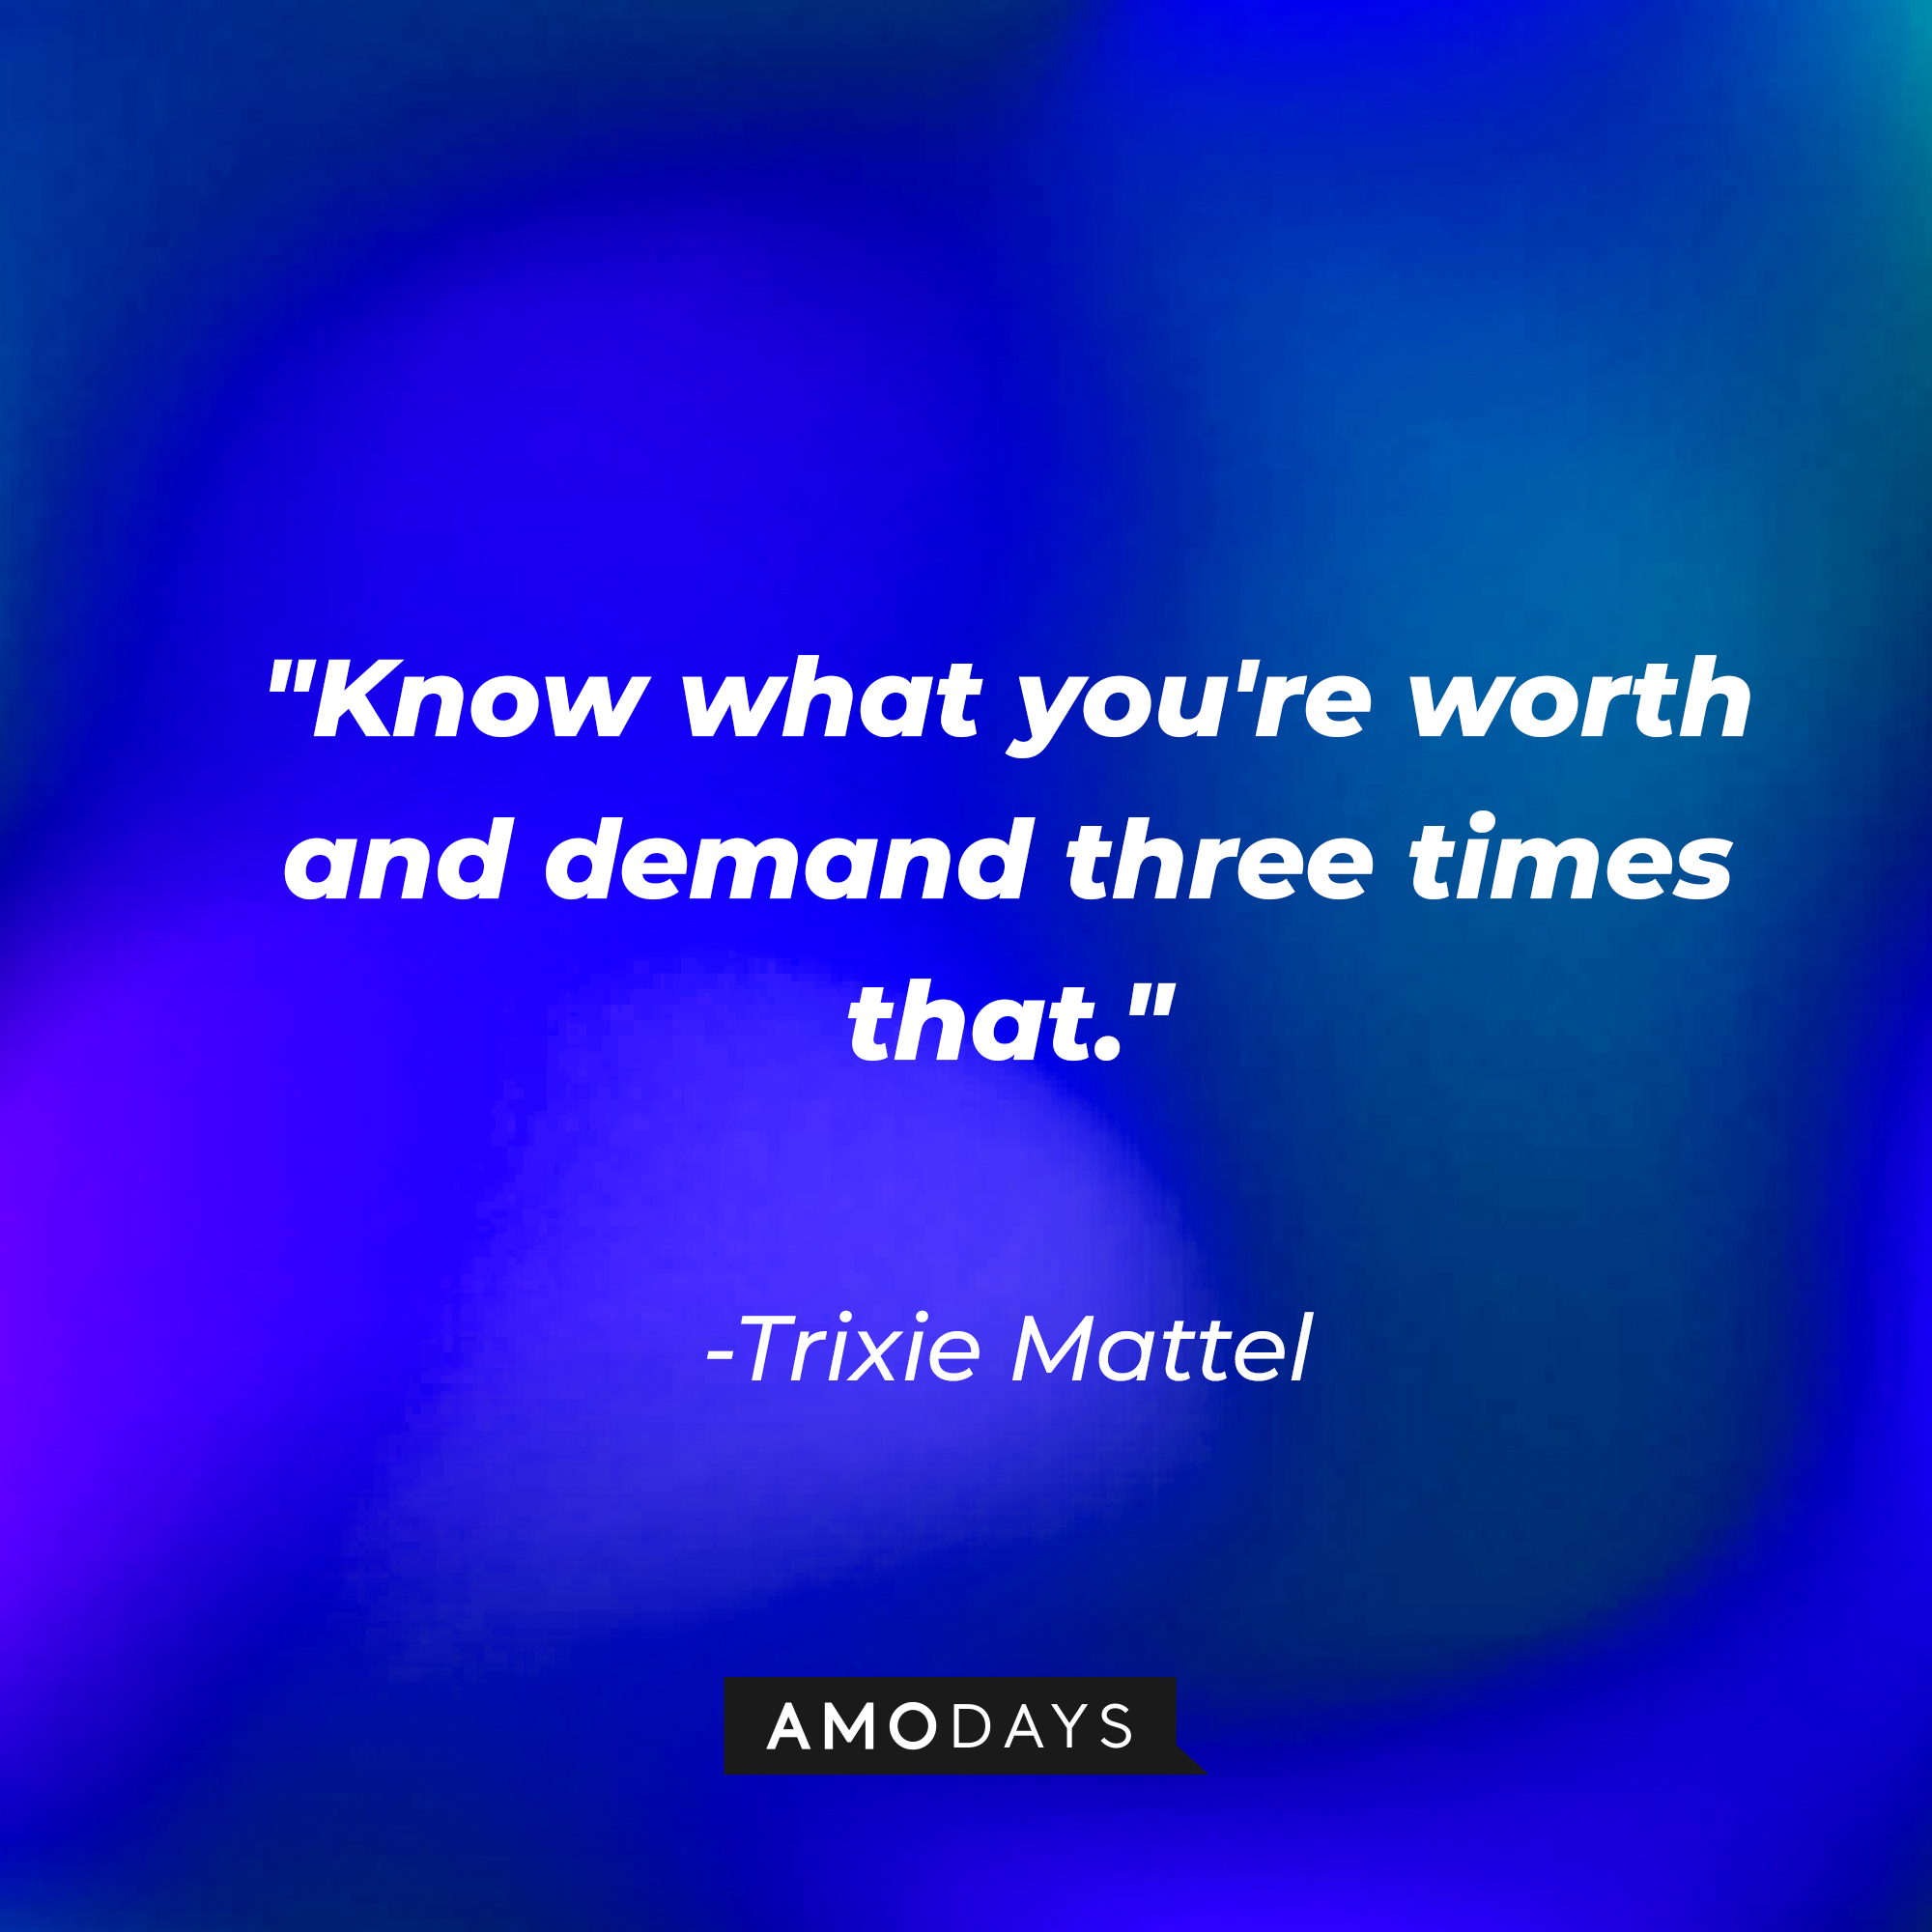 Trixie Mattel's quote: "Know what you're worth and demand three times that." | Source: AmoDays